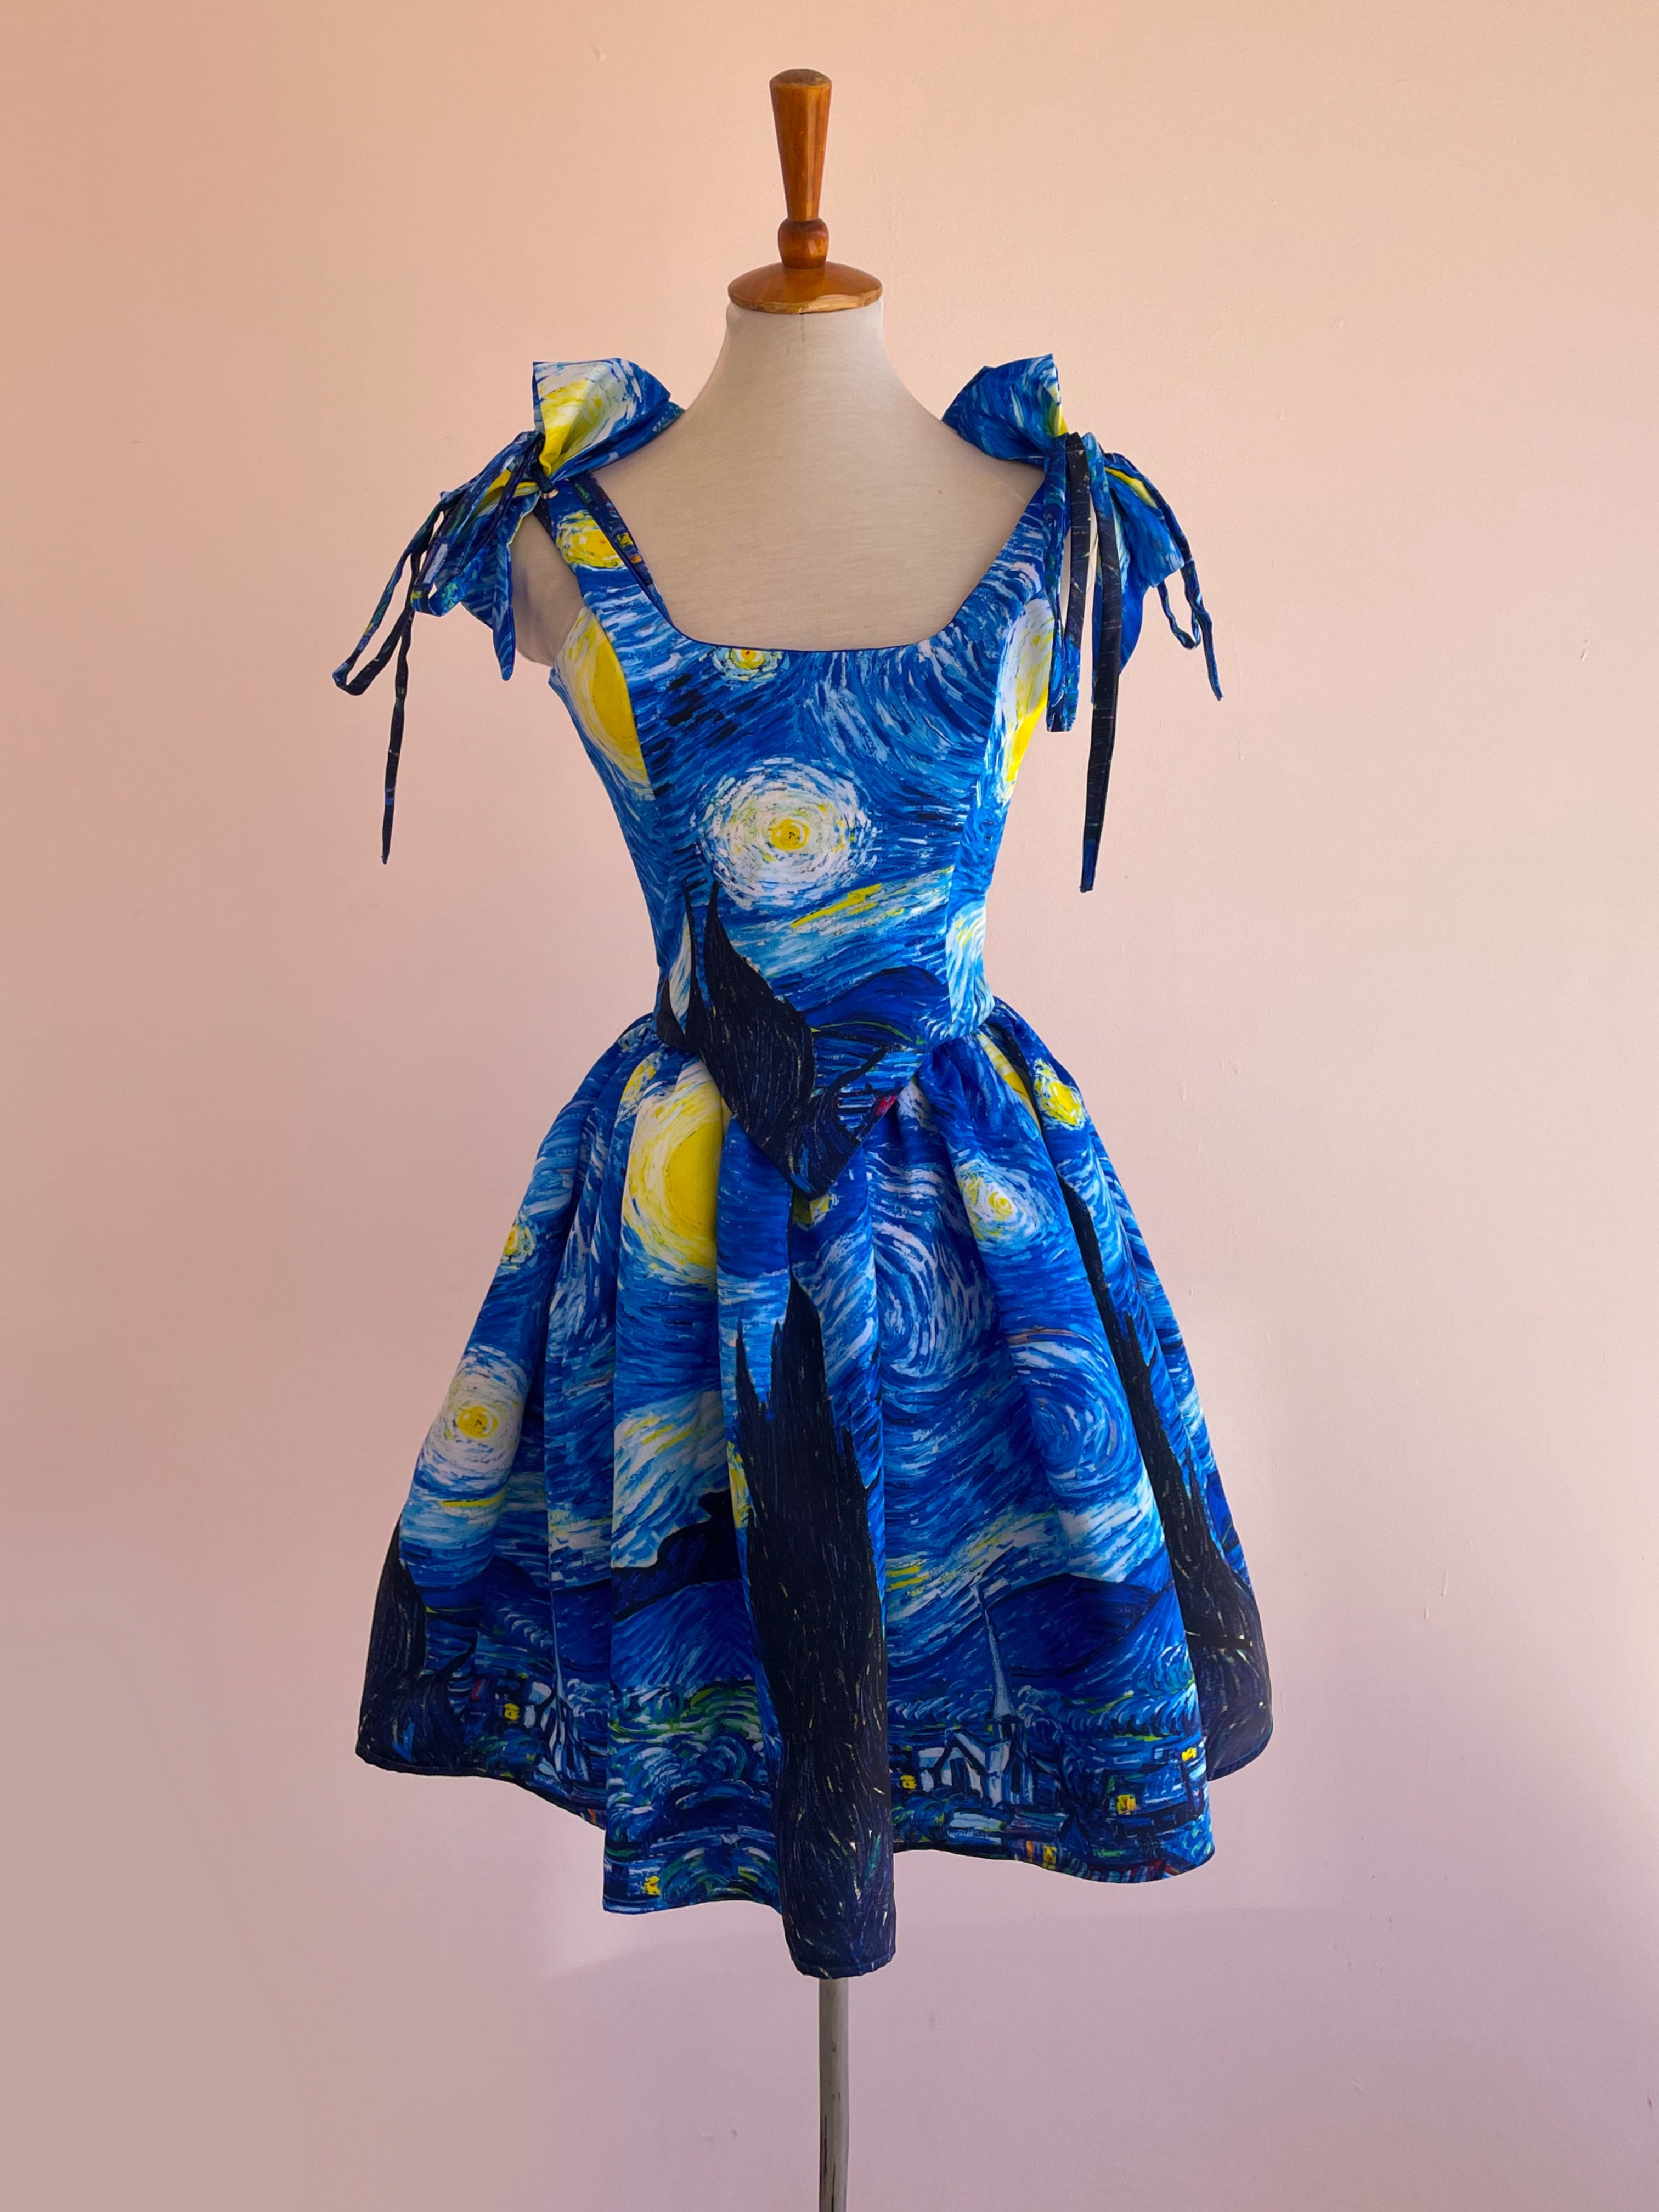 Van Gogh starry night dress WOW! | Starry night dress, Dresses with vans,  Pretty outfits